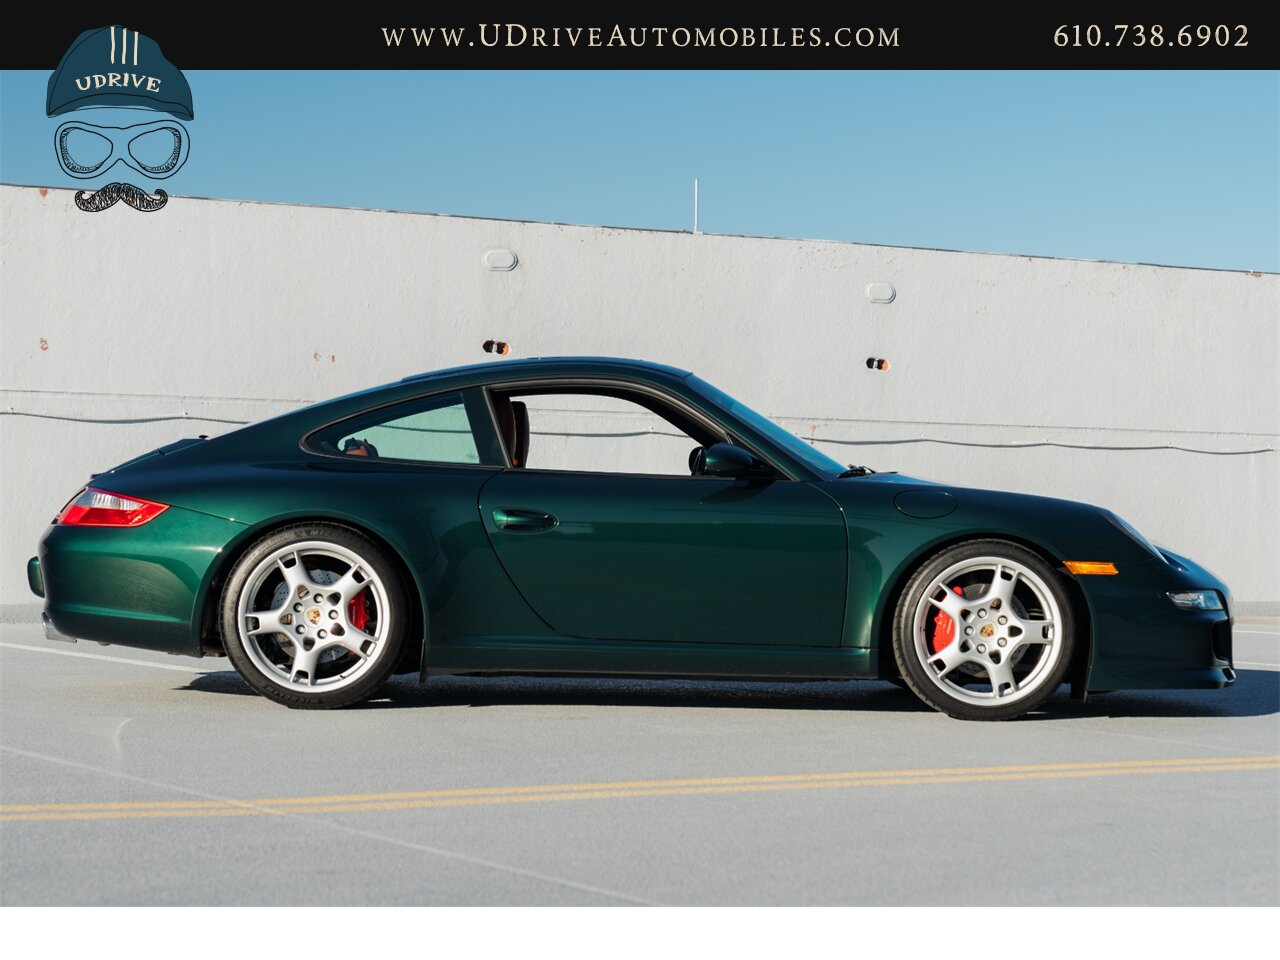 2007 Porsche 911 Carrera S 6Spd 997S RARE X51 Power Kit 381hp  1 of a Kind Forest Green over Blk/Terracotta Chrono Adap Sport Sts $113k MSRP - Photo 16 - West Chester, PA 19382